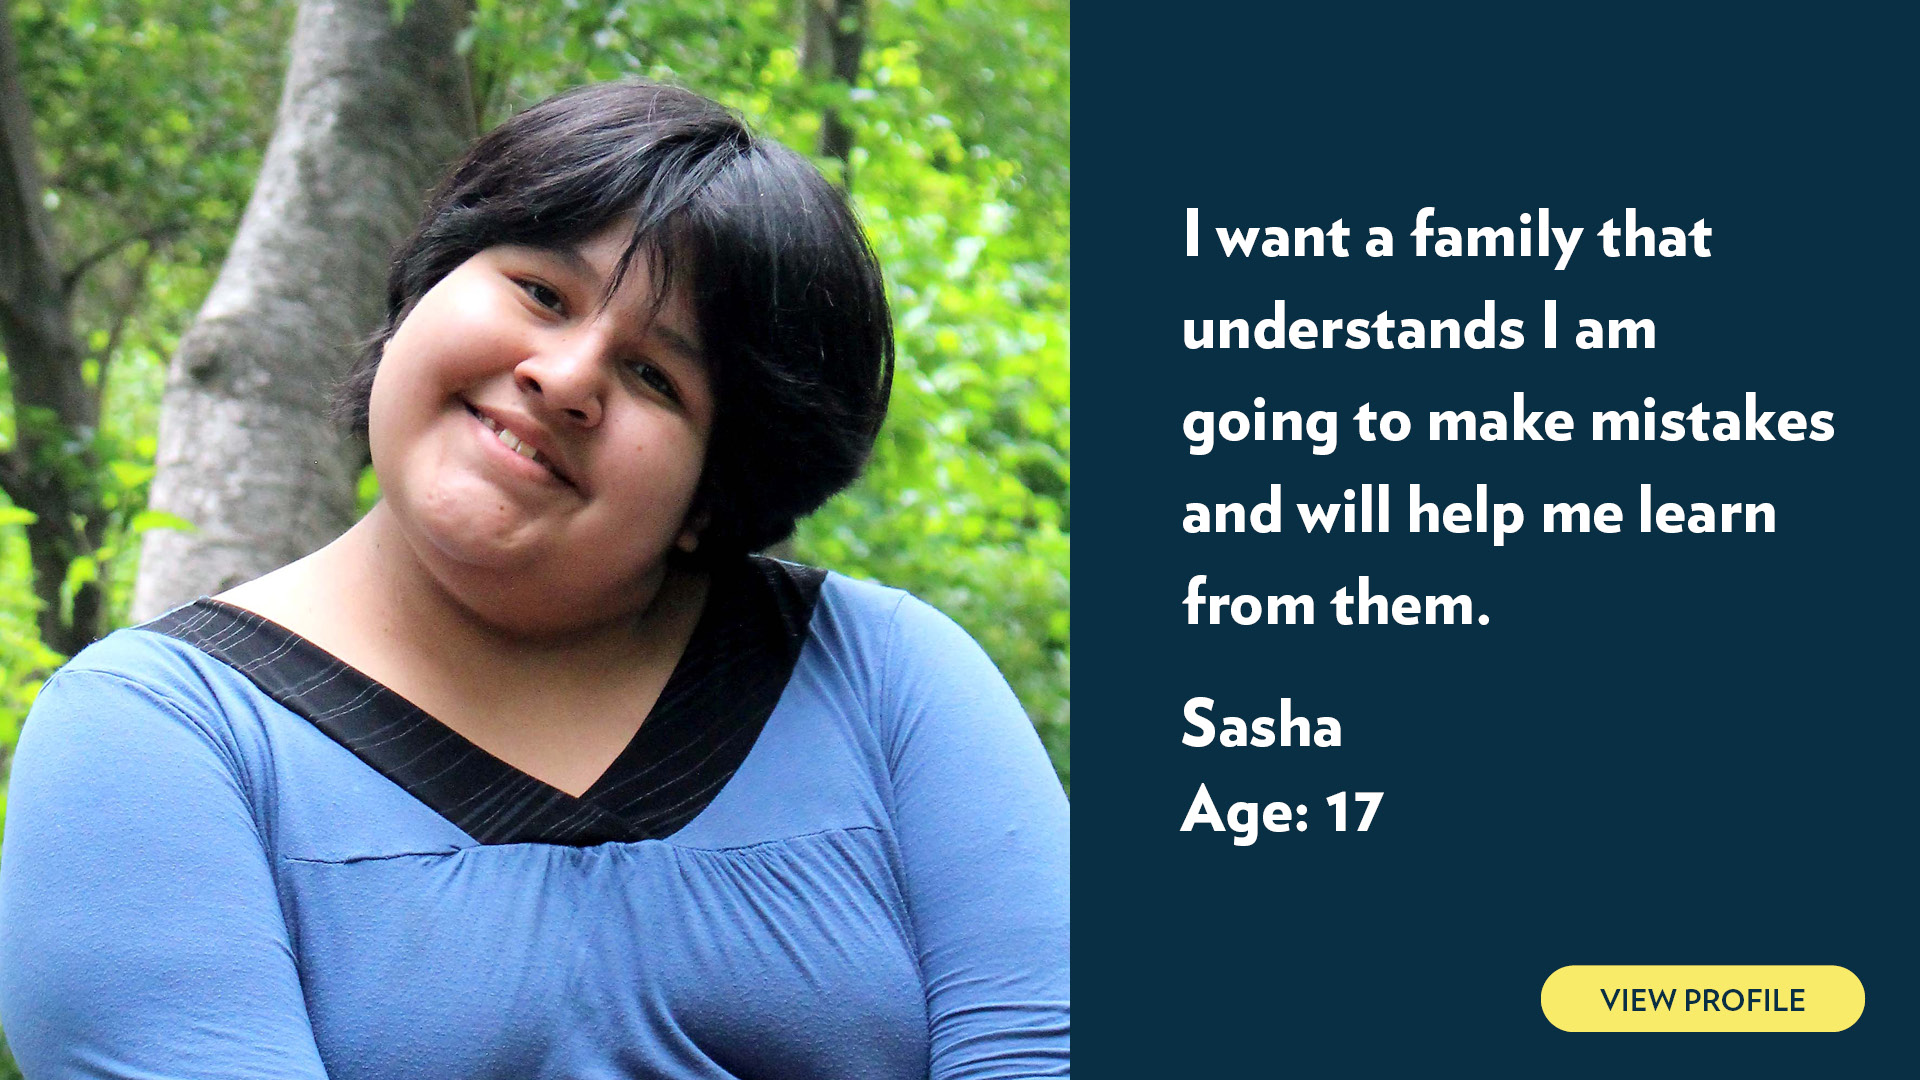 Sasha, age 17. I want a family that understands I am going to make mistakes and will help me learn from them. View profile.